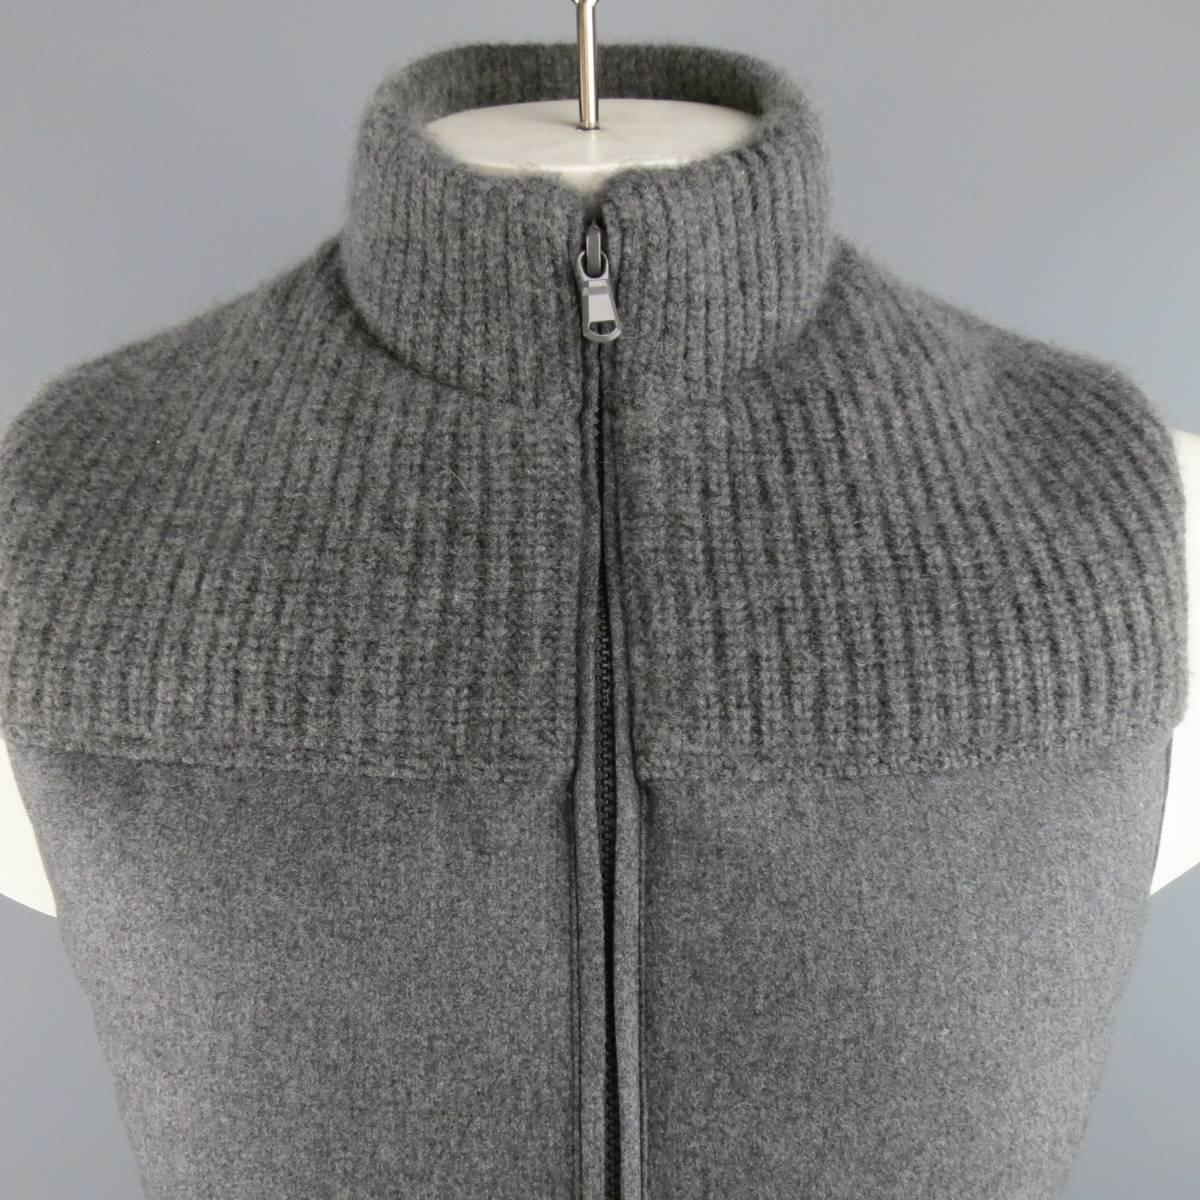 BRAND NEW BRUNELLO CUCINELLI Vest consists of wool/silk and cashmere material in a grey color tone. Designed in a high collar, zip-up front with top knit pattern. Quilted stitching toward bottom section and side pockets. New with tags.
Comes with